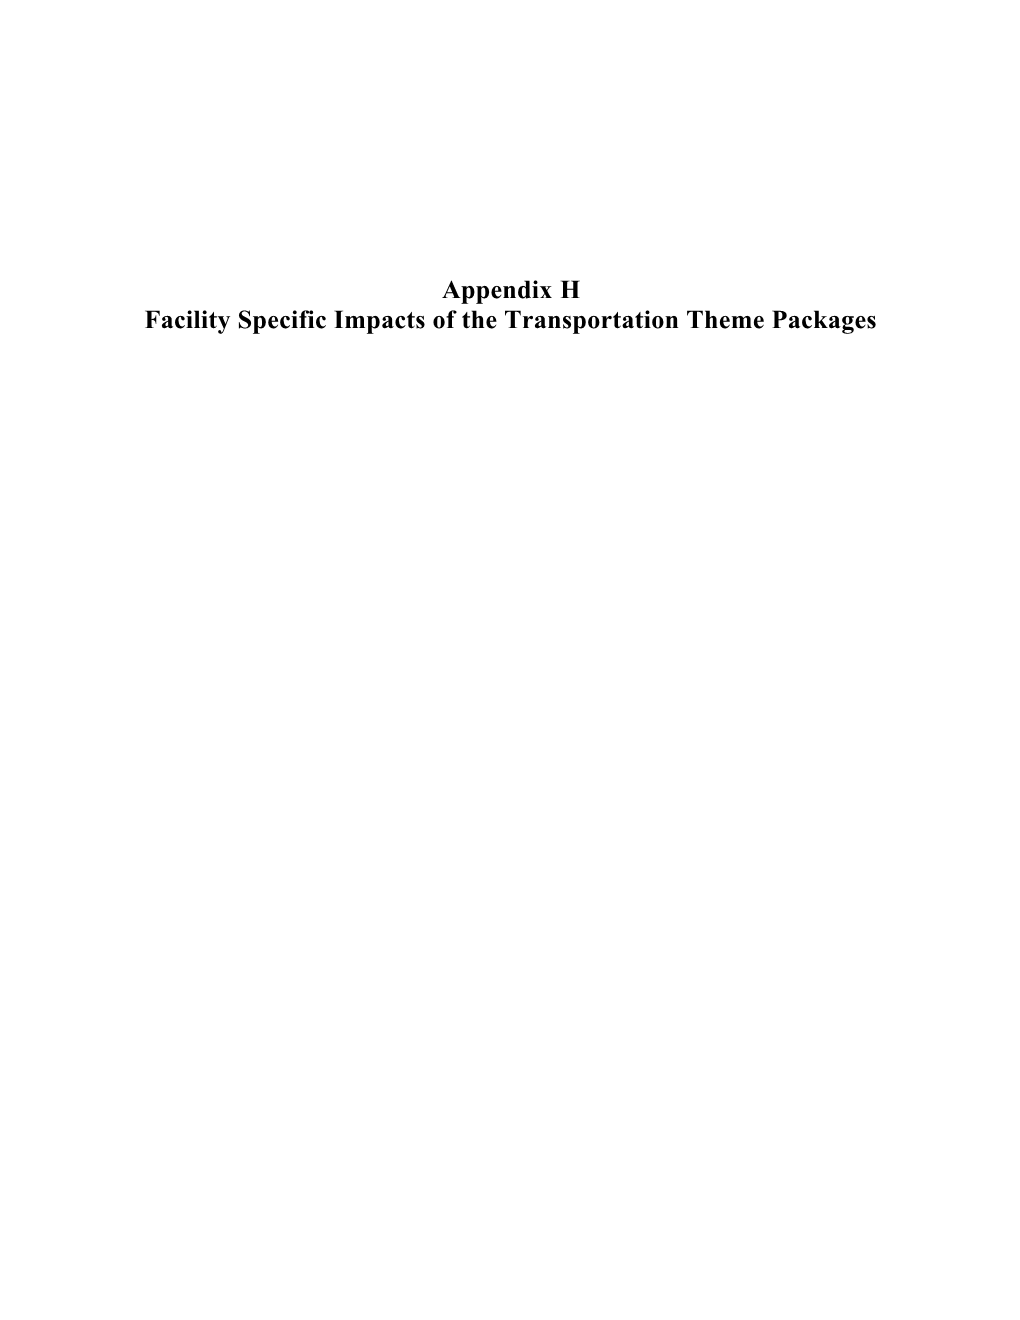 Appendix H Locational Impacts of Trans Theme Packages